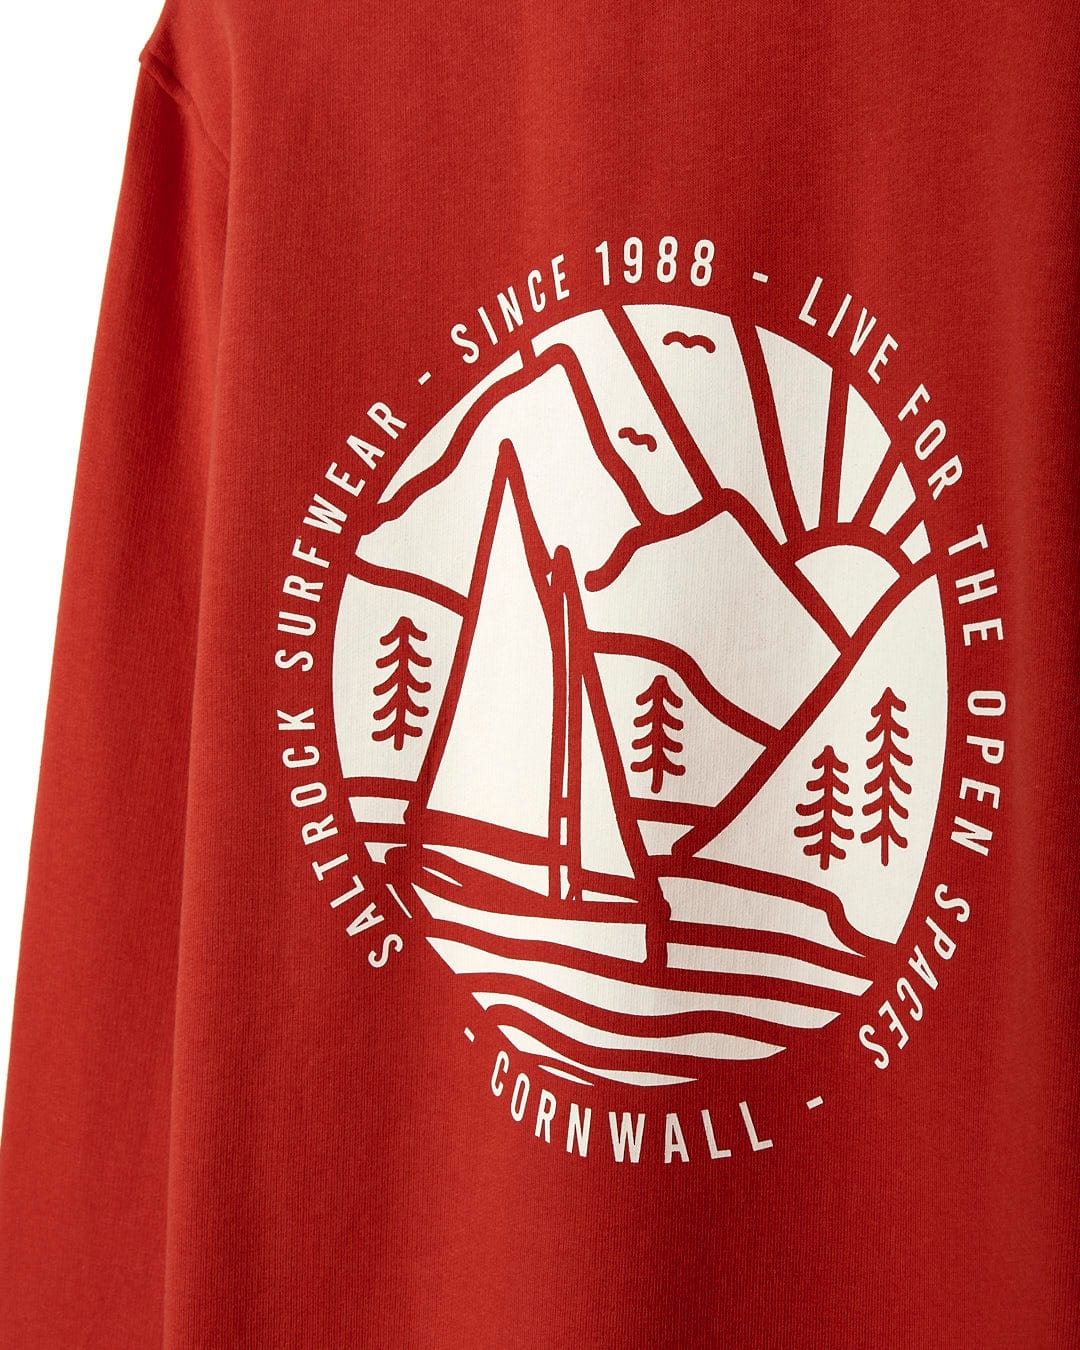 A Cornwall Sailaway - Mens Pop Hoodie - Red with a sailboat on it, made by Saltrock.